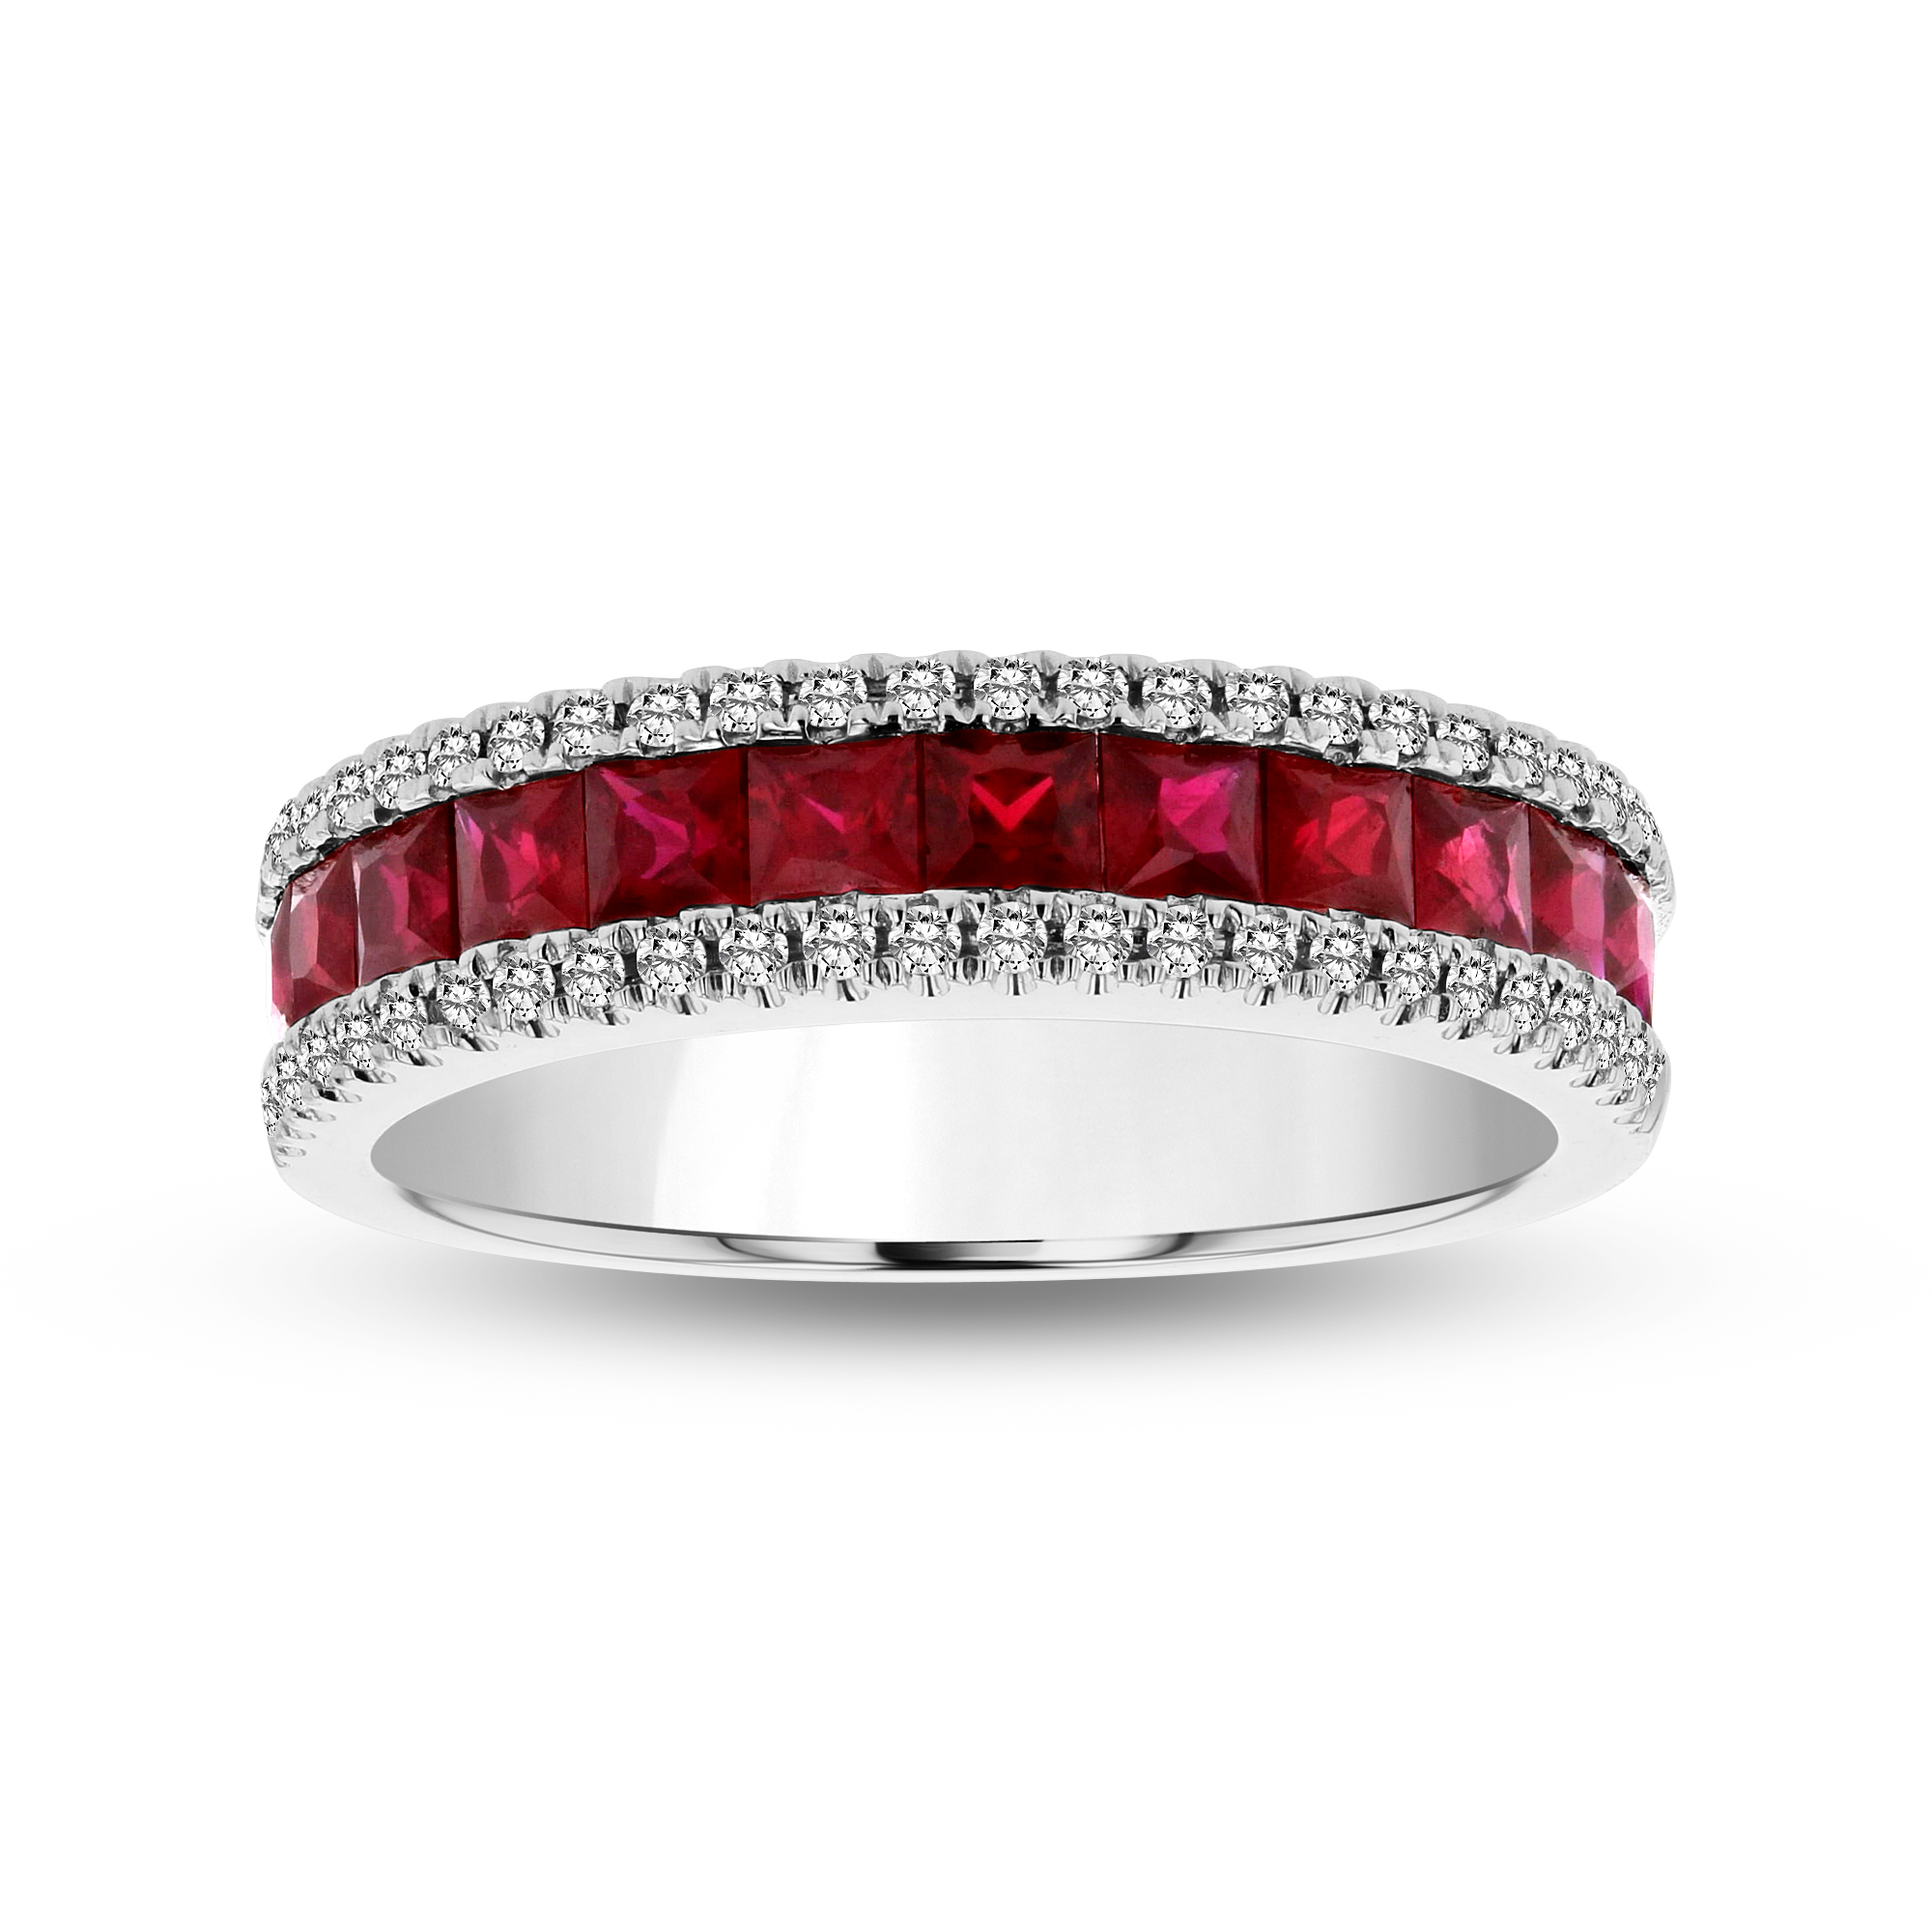 1.40ctw Diamond and Ruby Ring in 18k White Gold